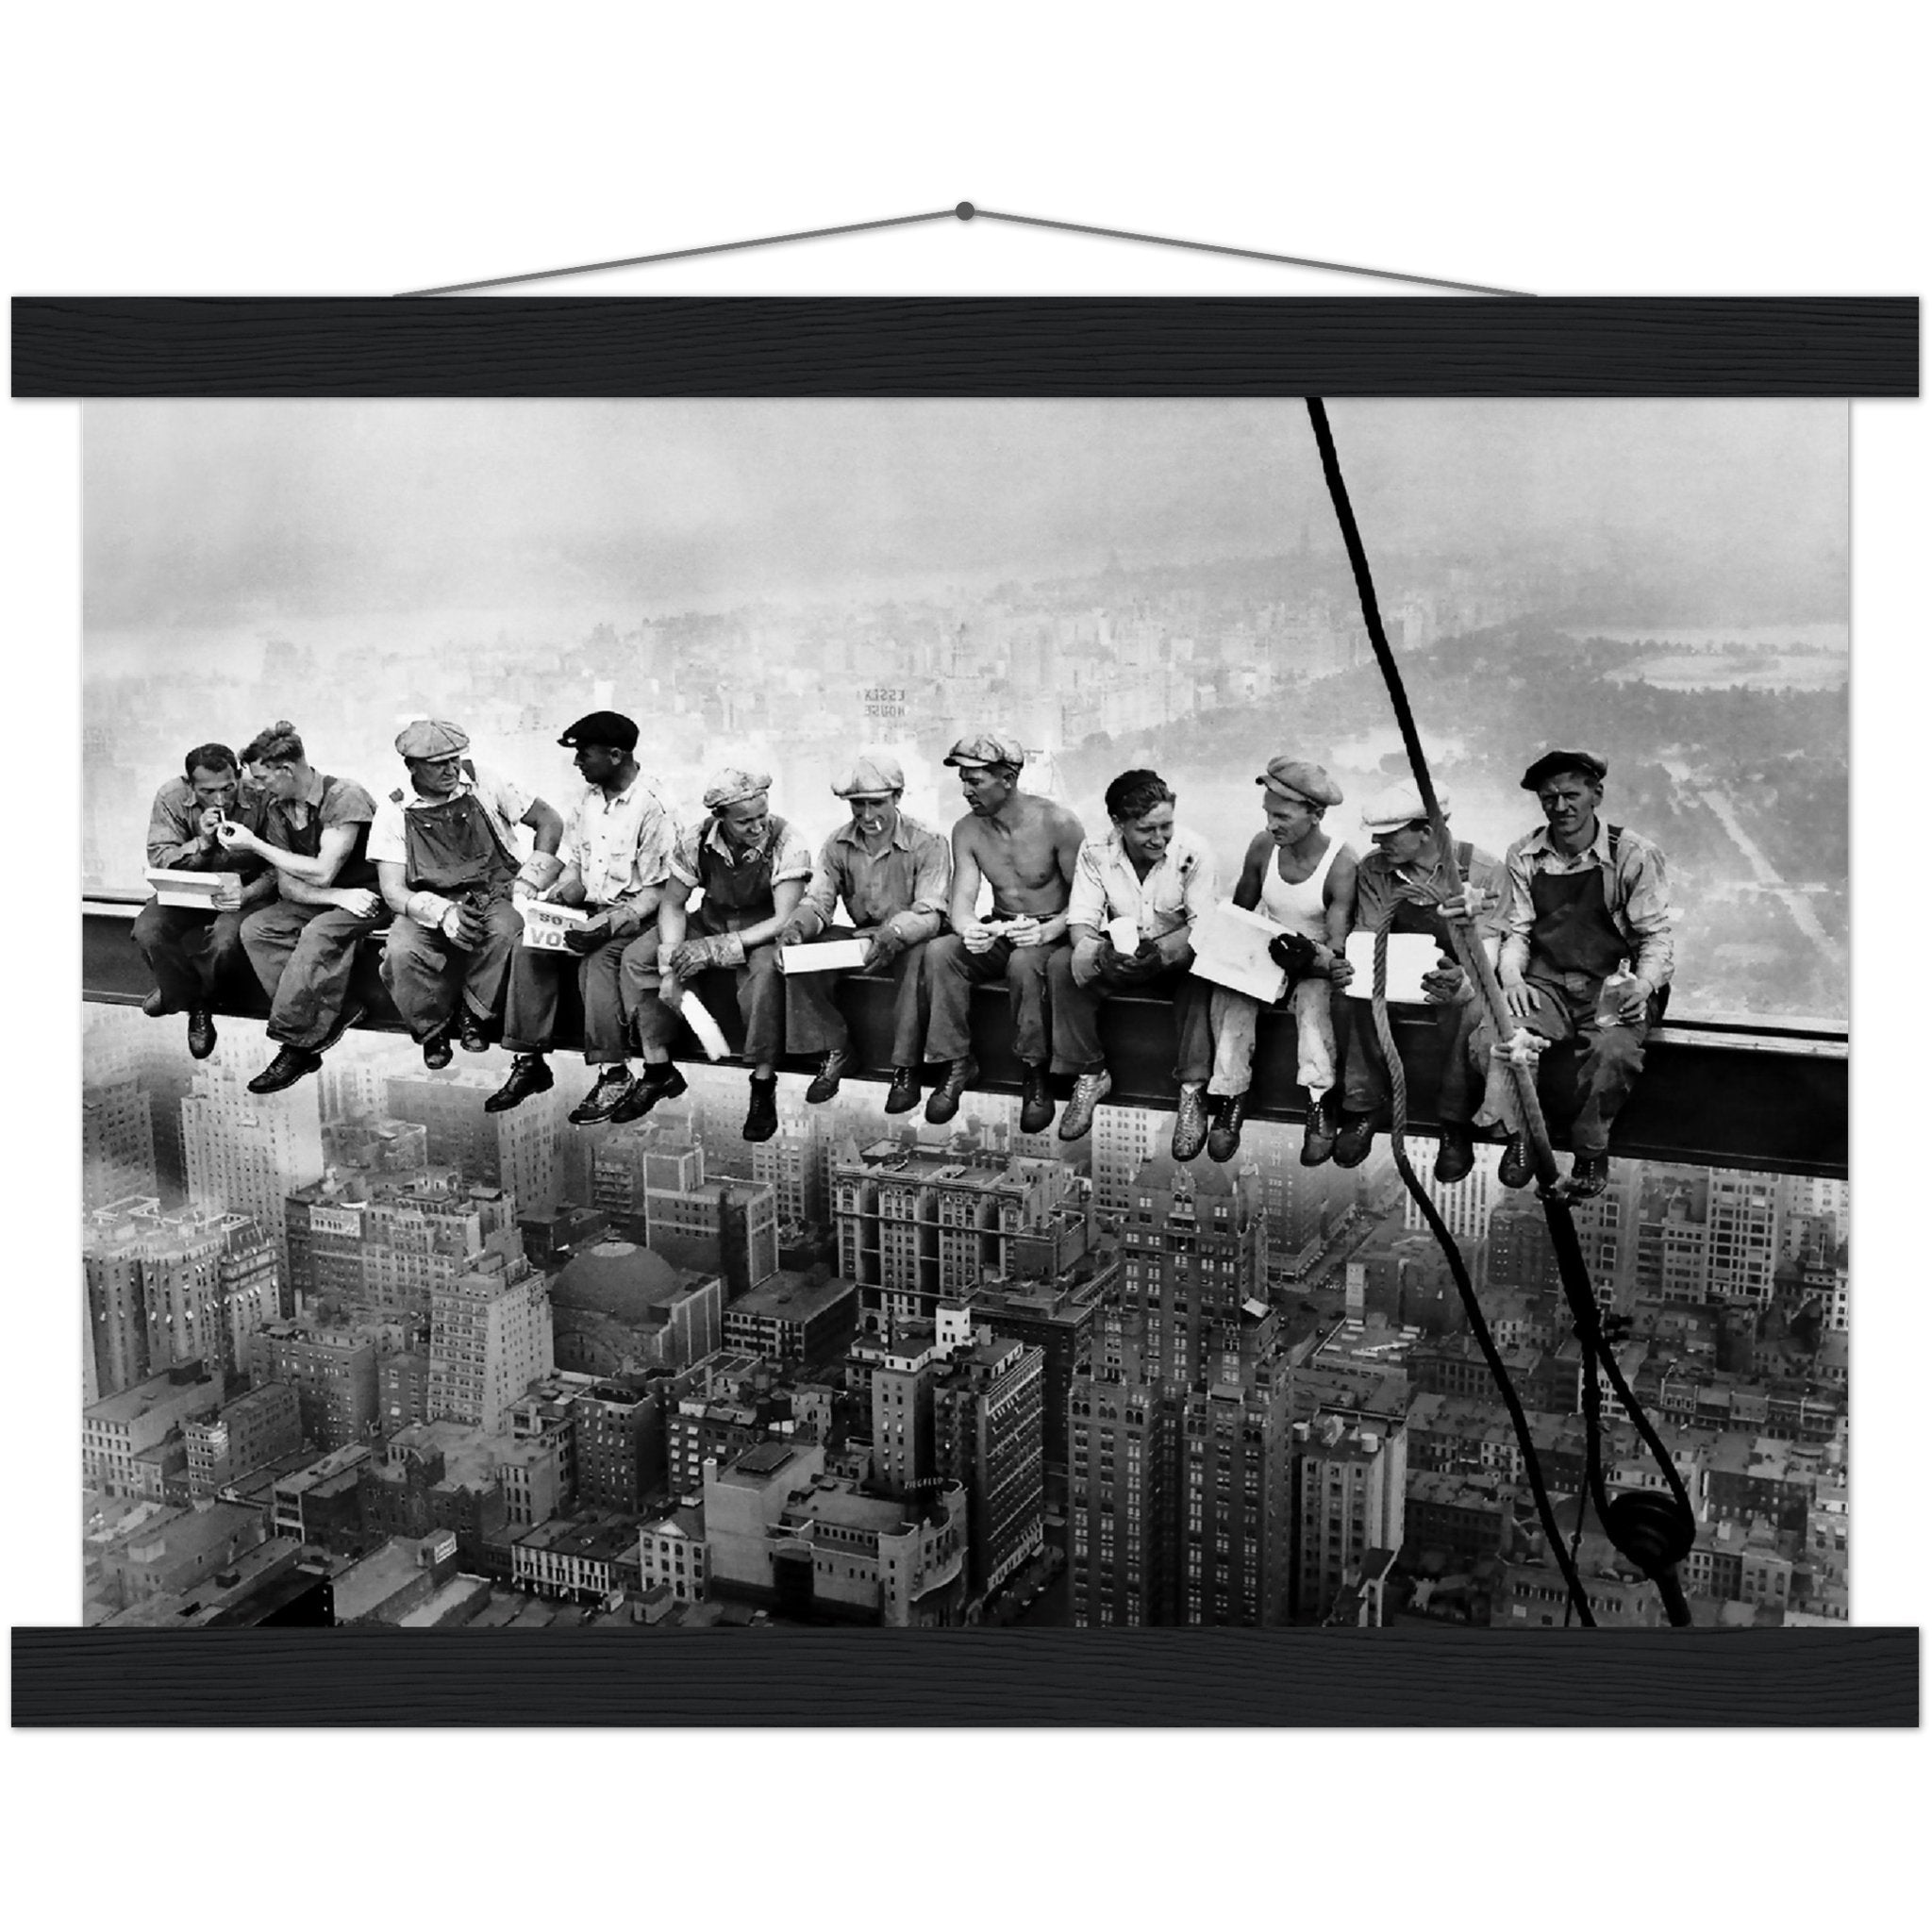 Lunch Atop A Skyscraper Poster, Lunch On A Beam, Vintage Photo 1932 Construction Workers - WallArtPrints4U